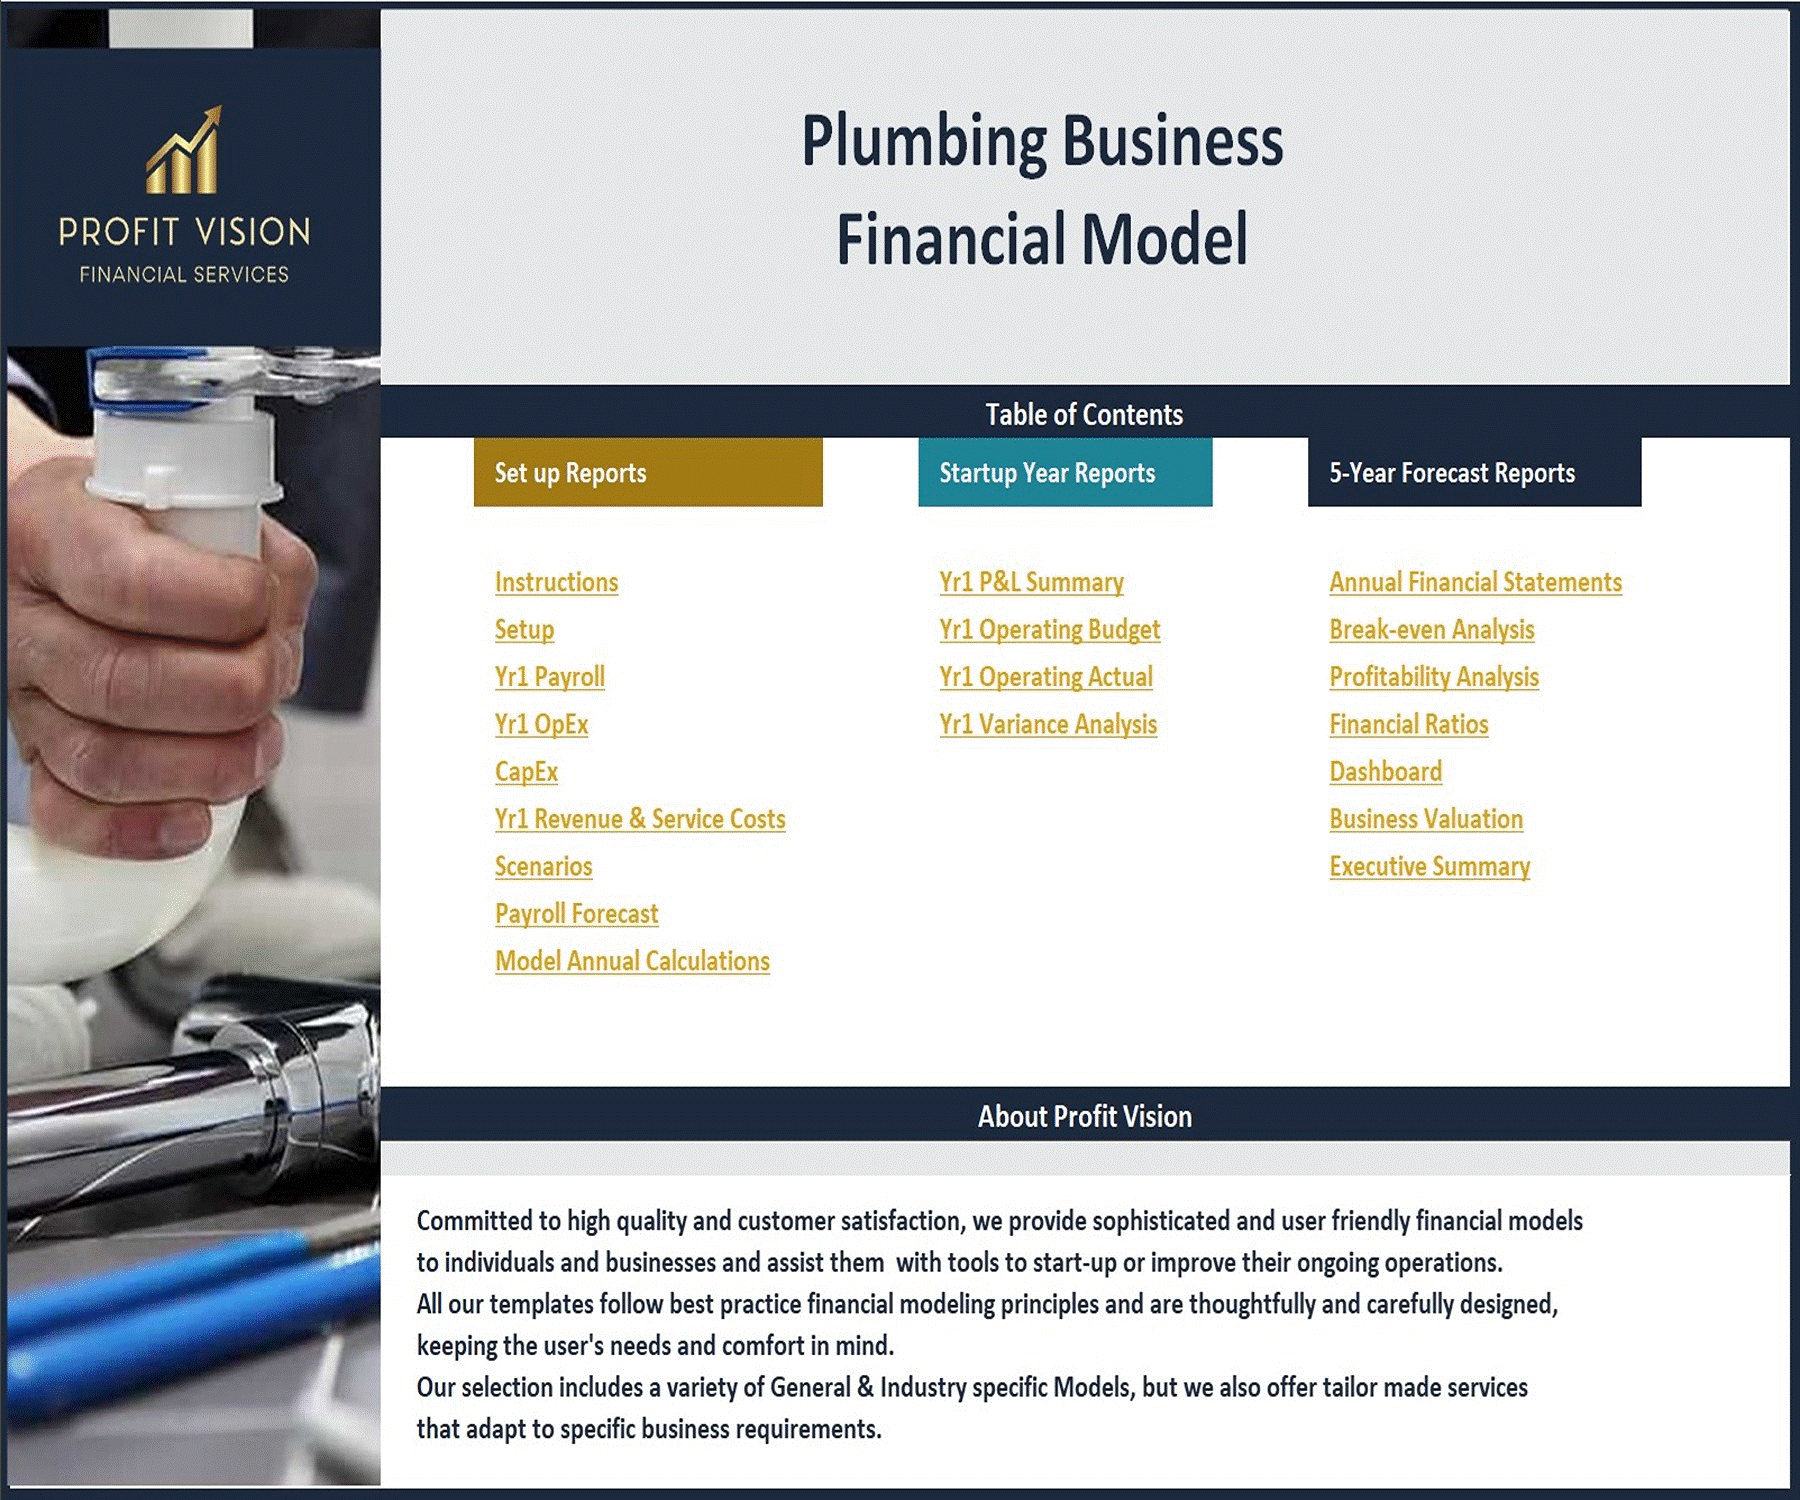 Plumbing Business Financial Model – 5 Year Forecast (Excel template (XLSX)) Preview Image